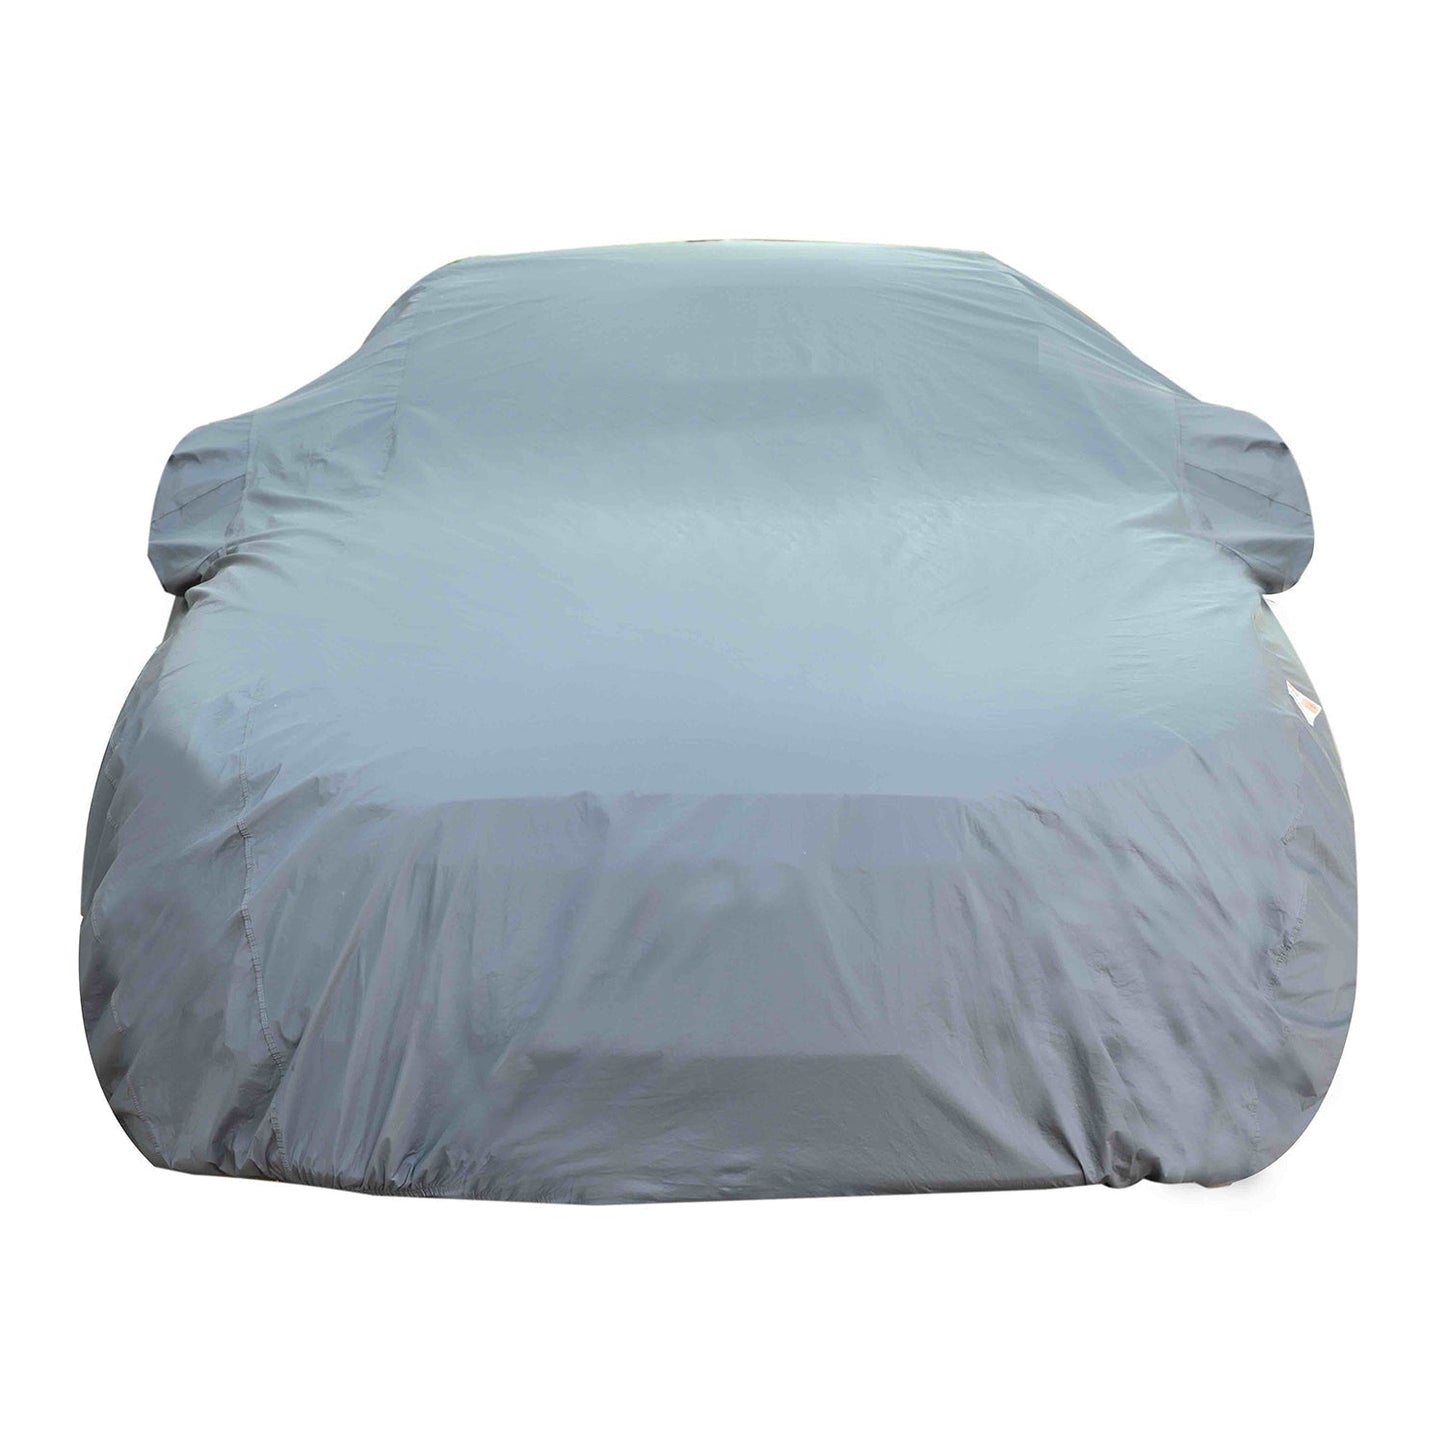 Oshotto Dark Grey 100% Anti Reflective, dustproof and Water Proof Car Body Cover with Mirror Pockets For Skoda Rapid